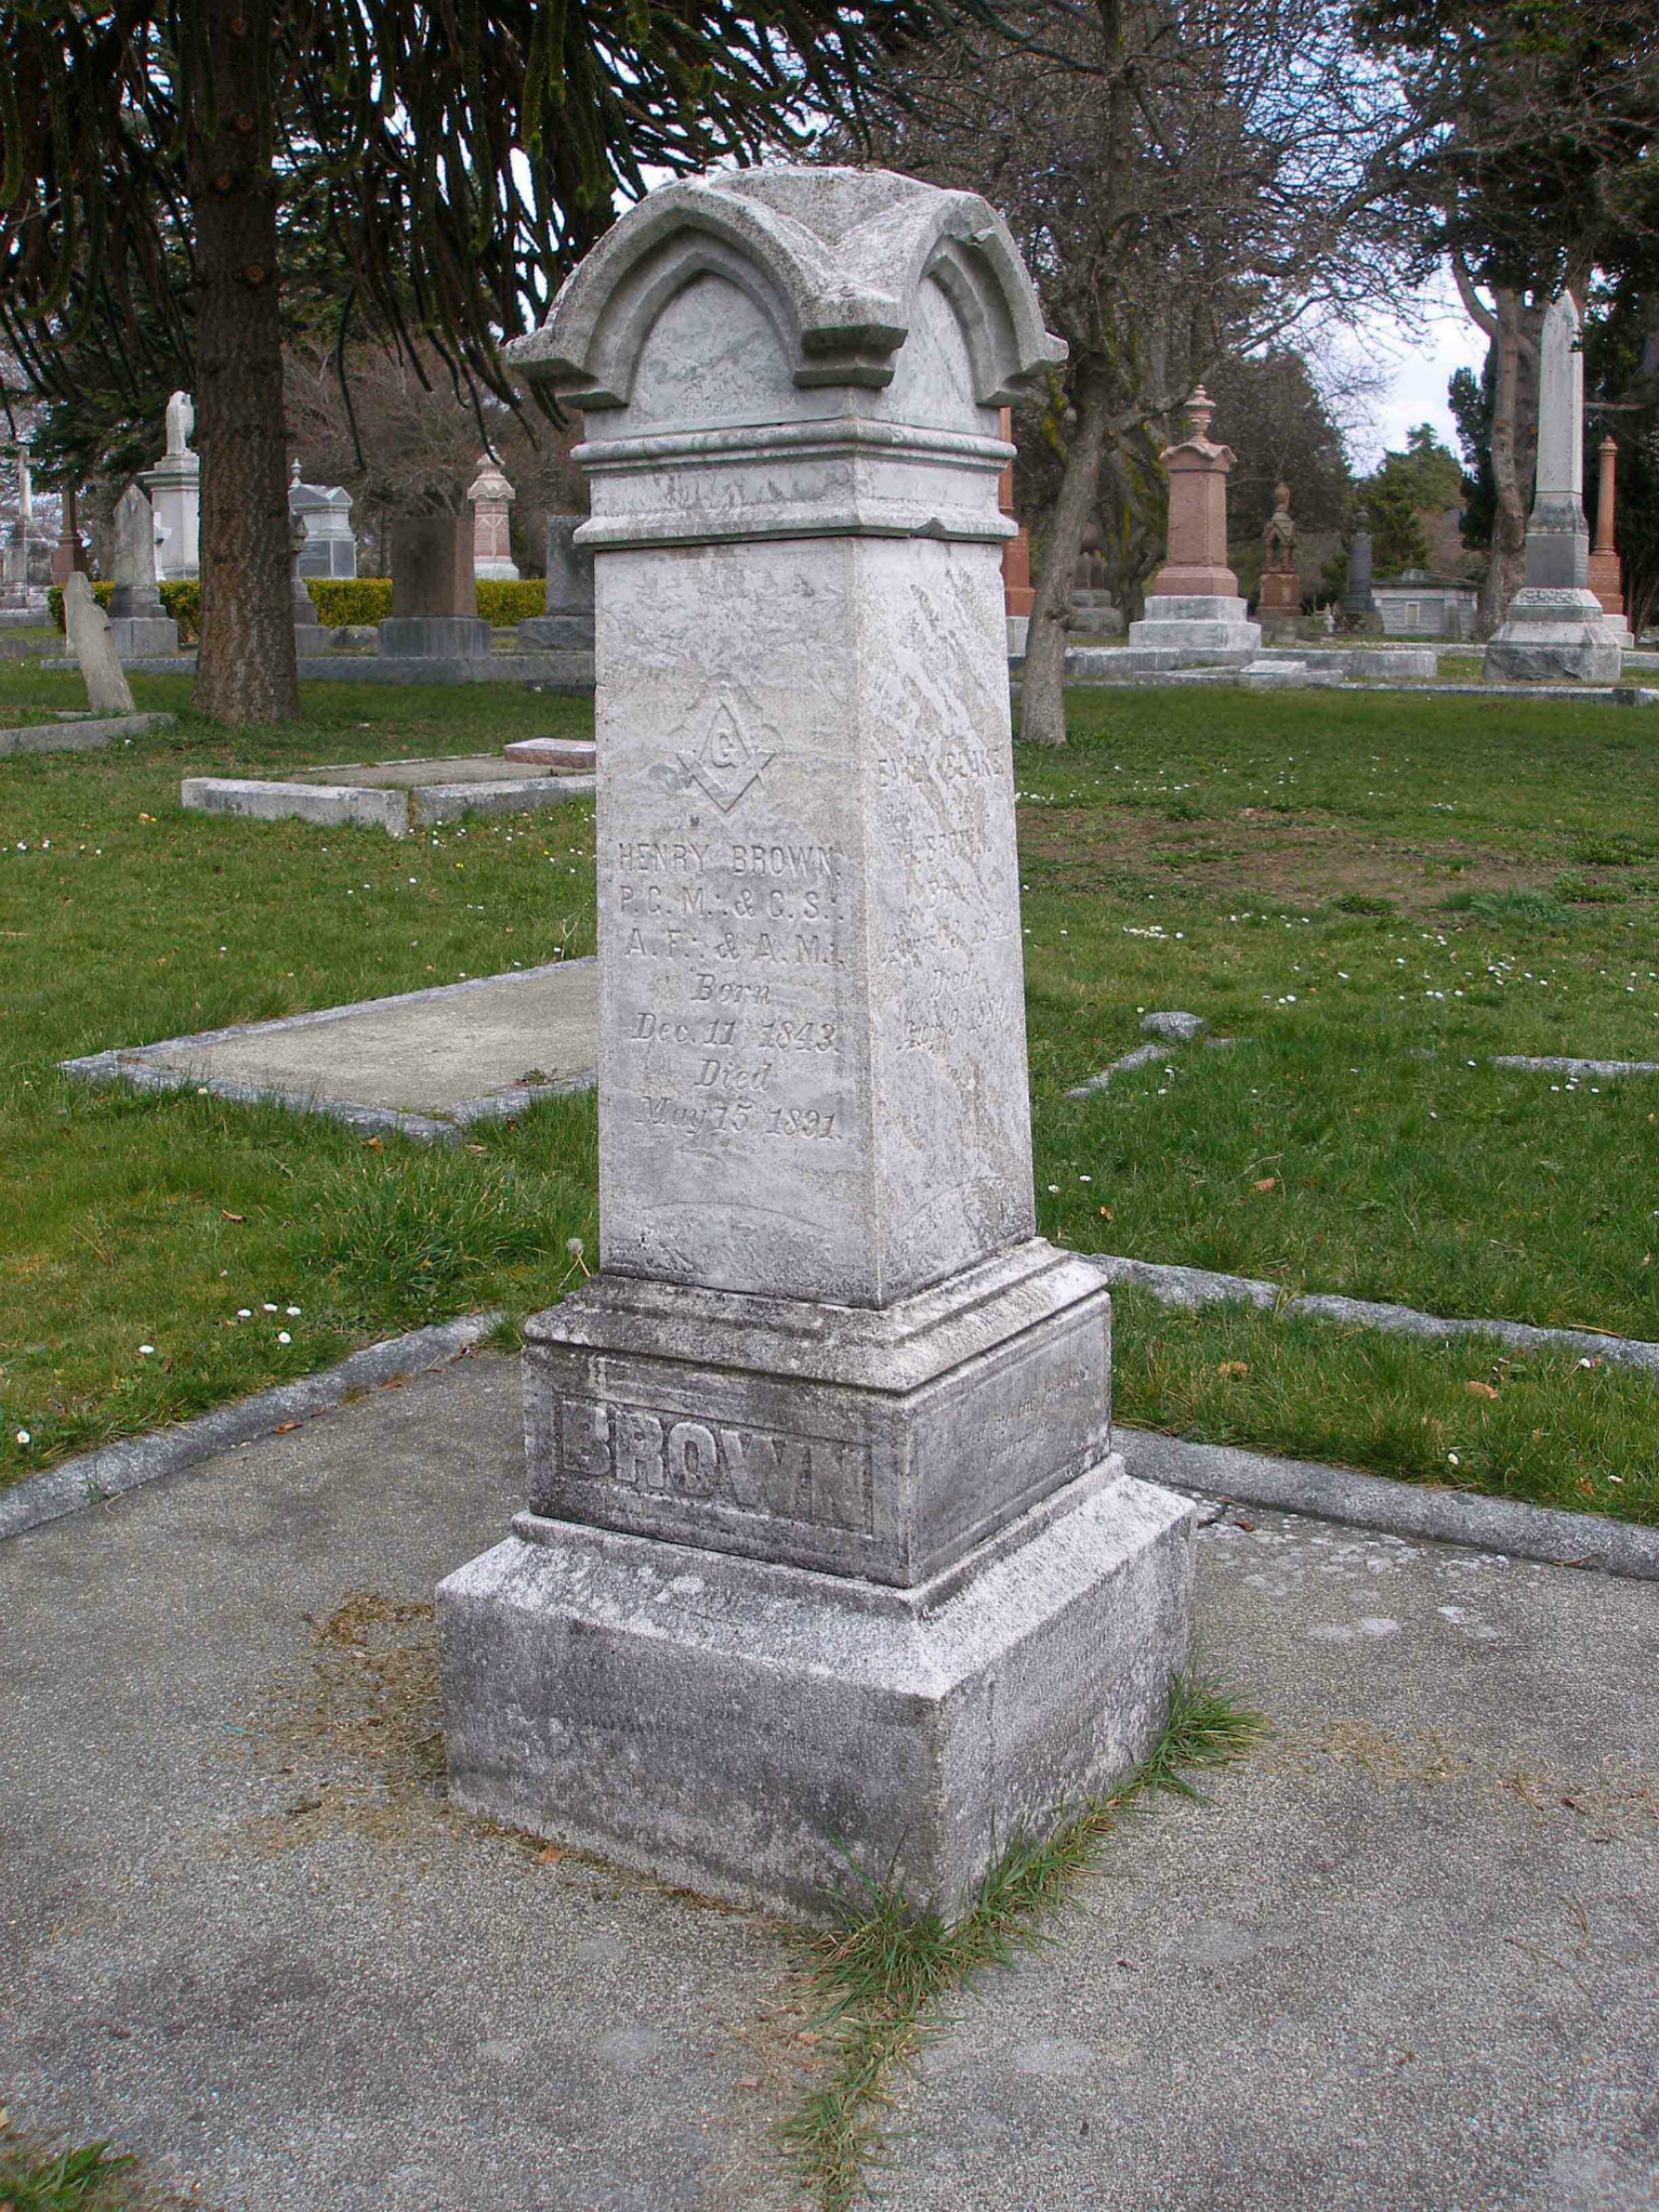 Henry Brown, Past Grand Master, grave in Ross Bay cemetery, Victoria, B.C.